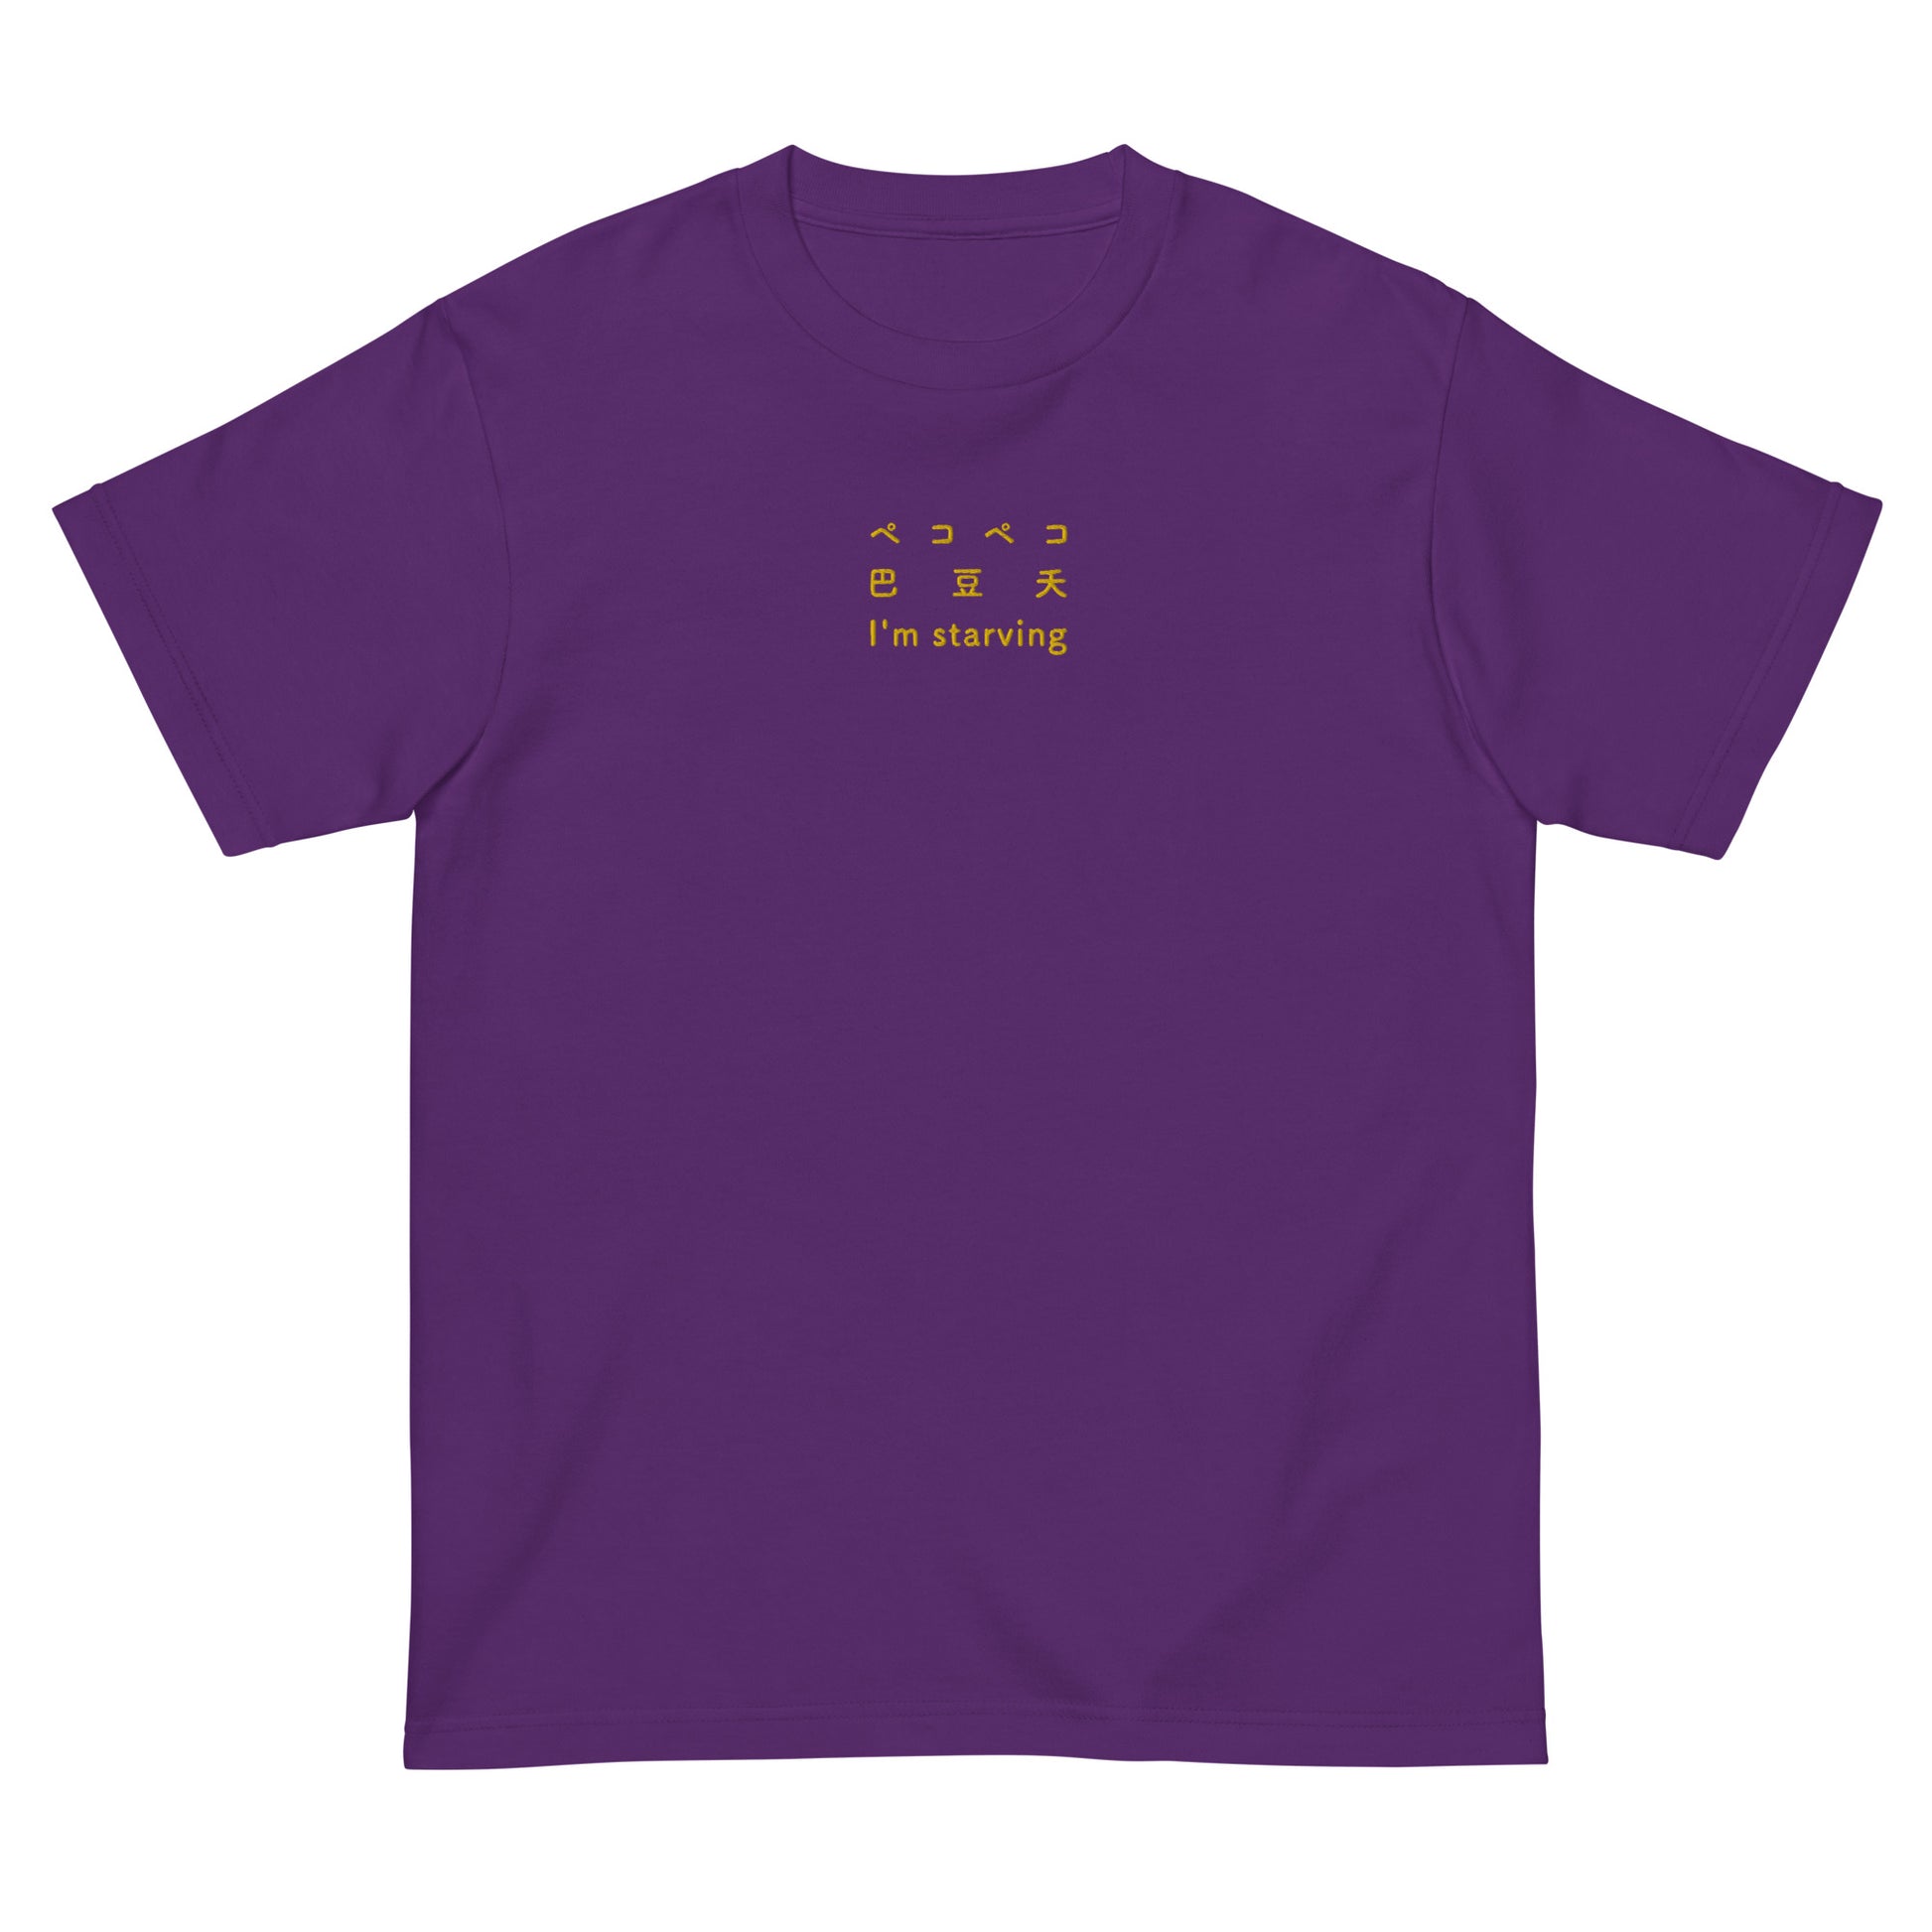 Purple High Quality Tee - Front Design with an Yellow Embroidery "I'm Starving" in three languages